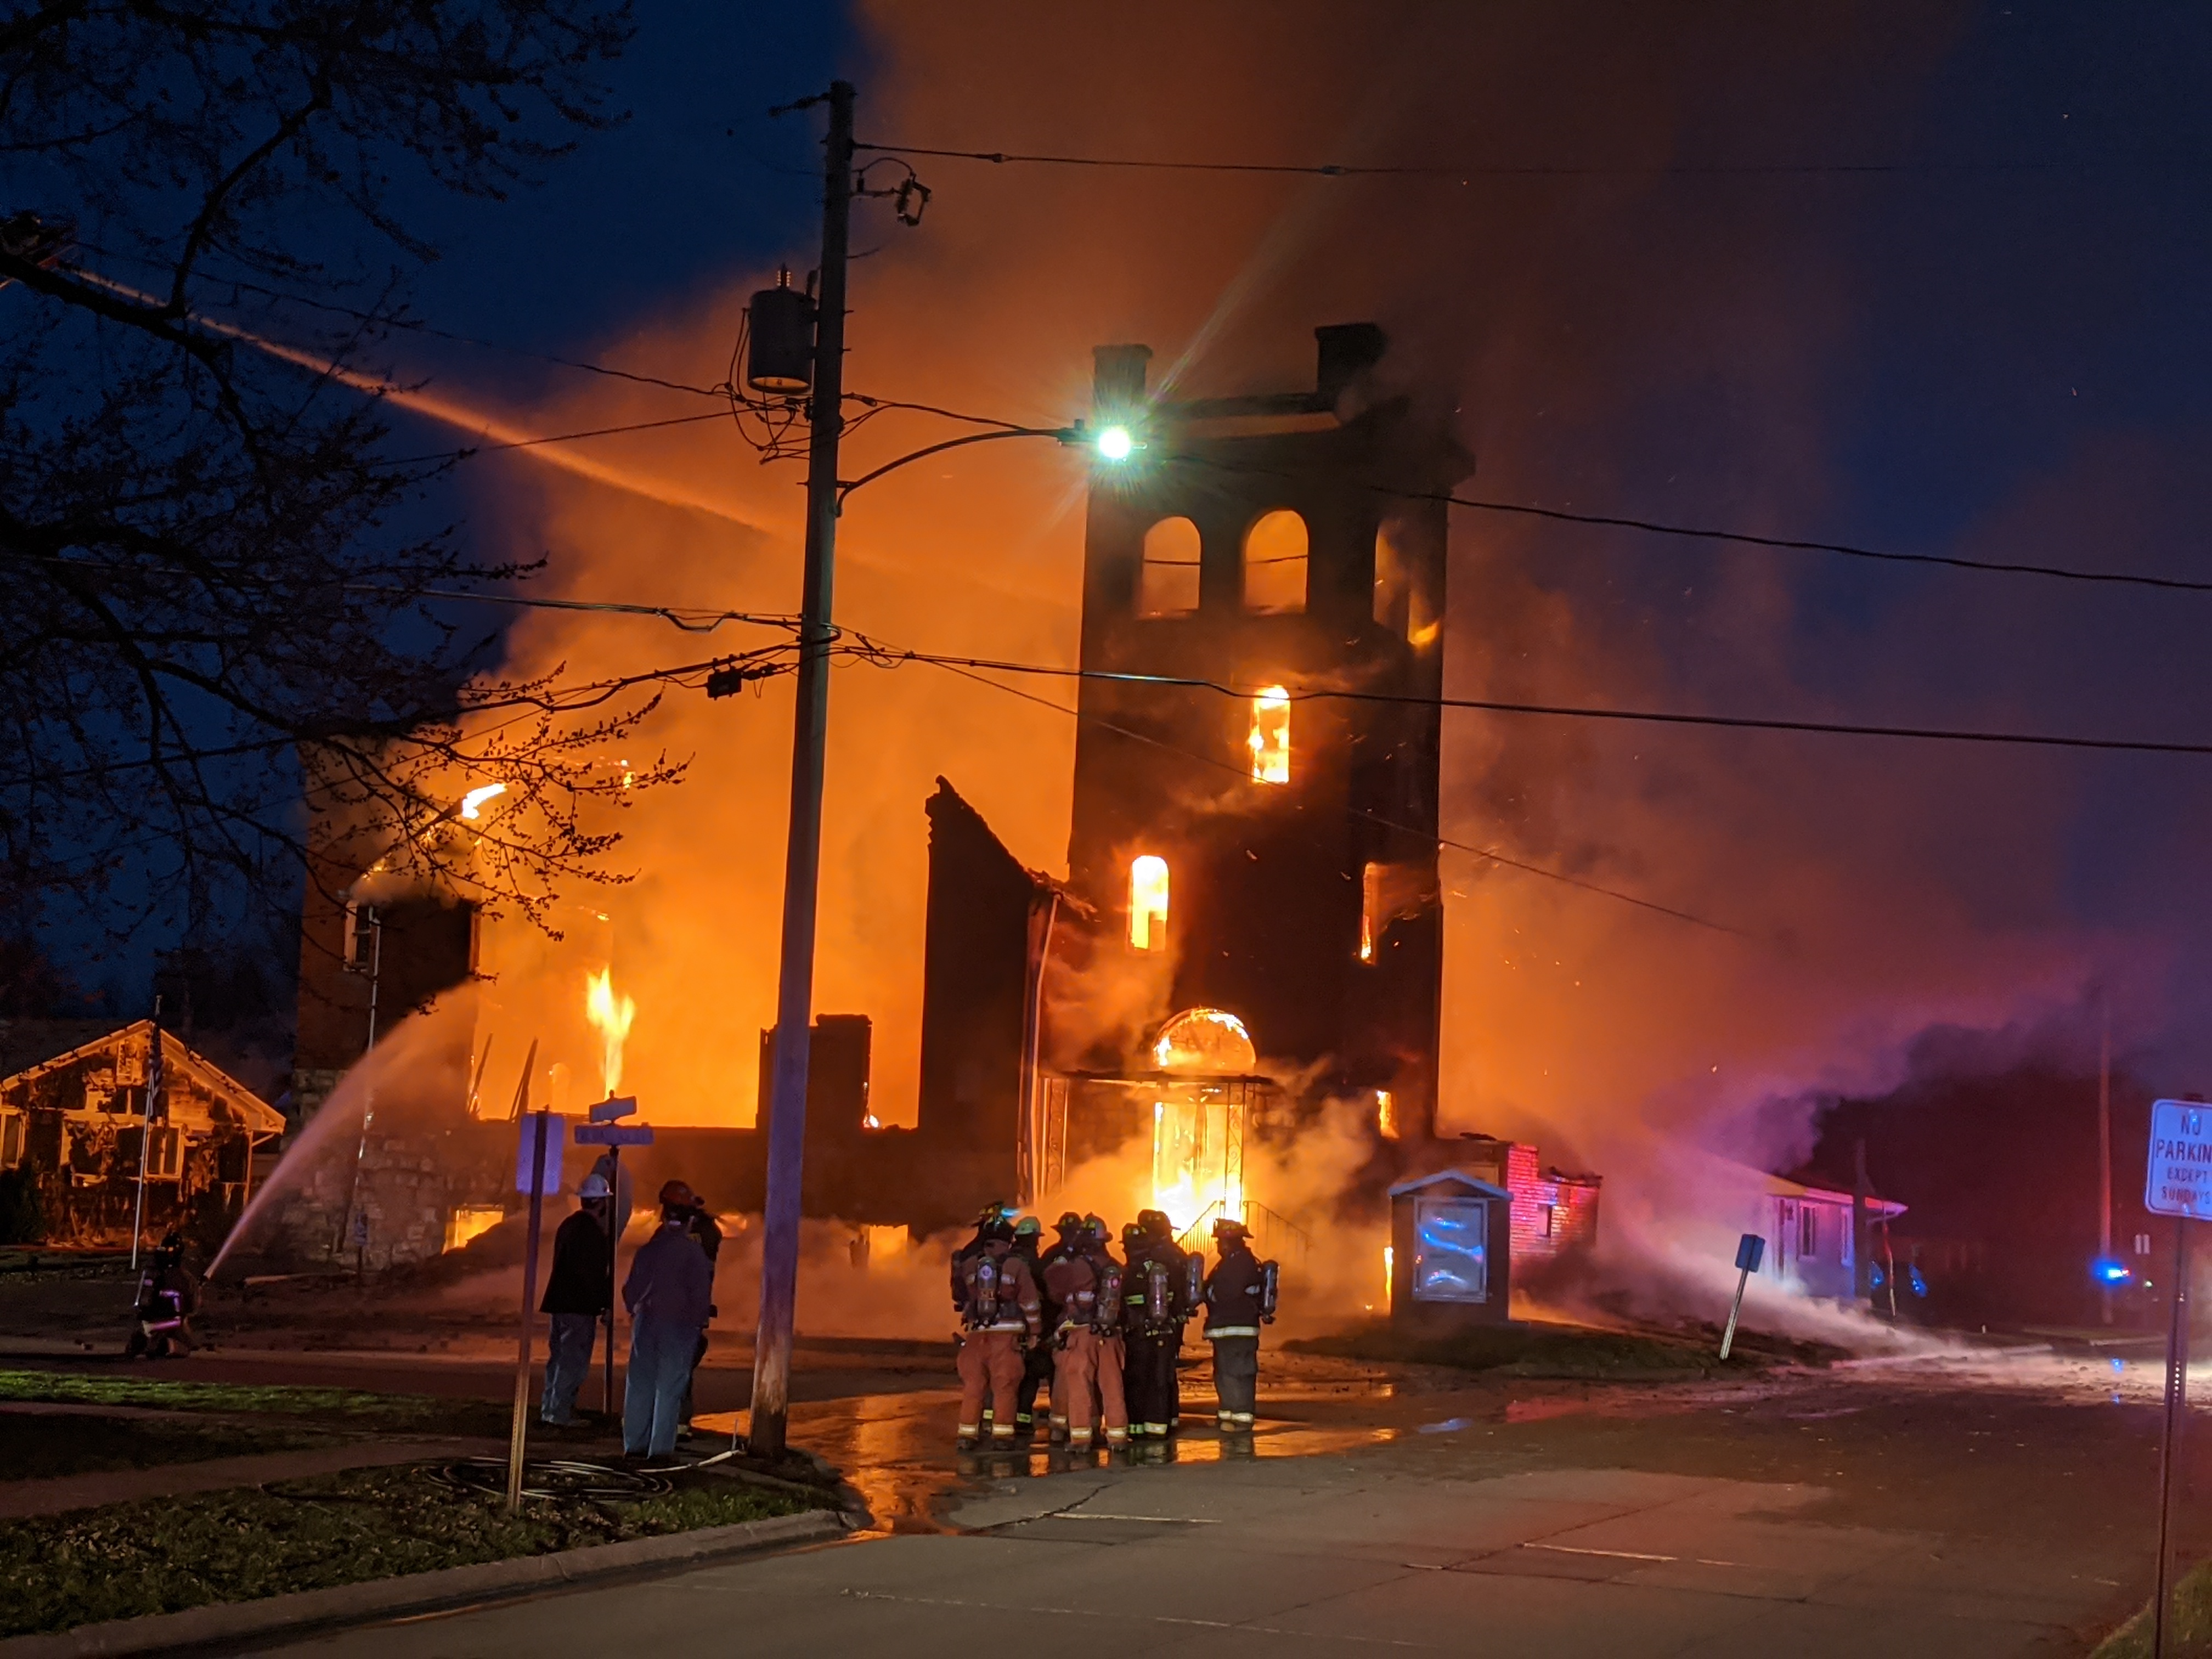 Fire Destroys Pleasantville Church | KNIA KRLS Radio - The One to Count On